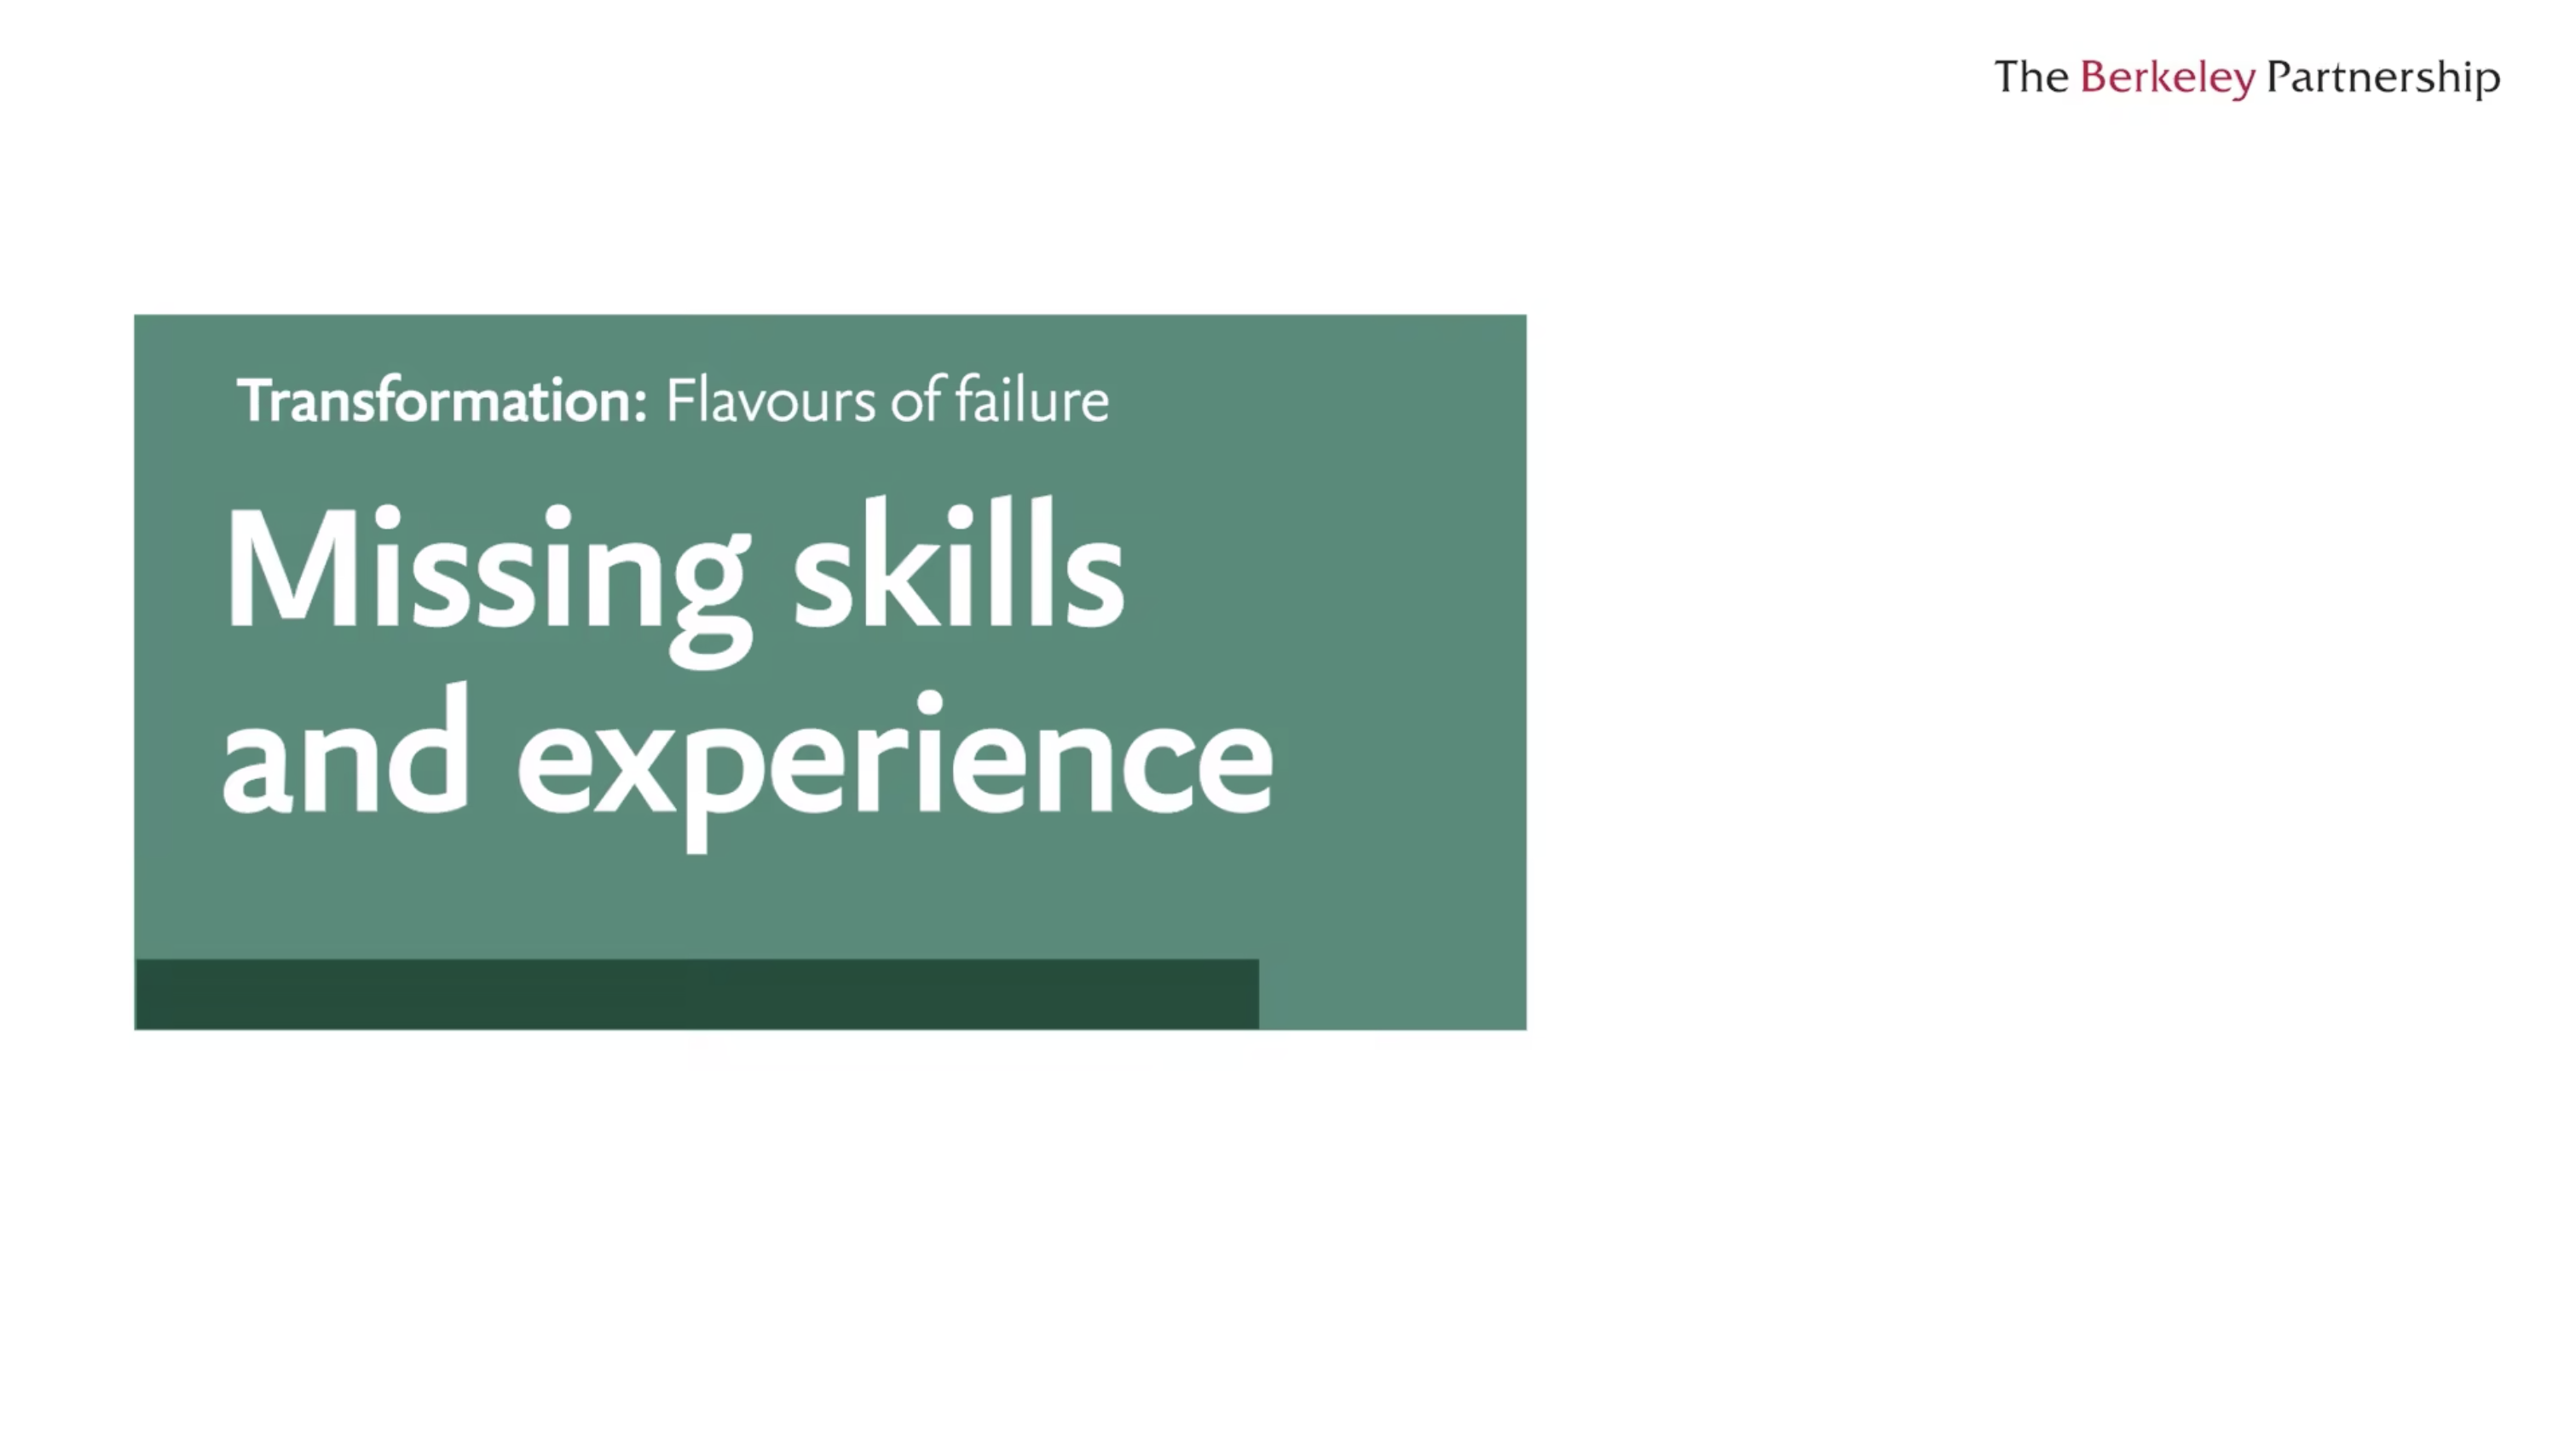 Flavours of failure: Missing skills and experience